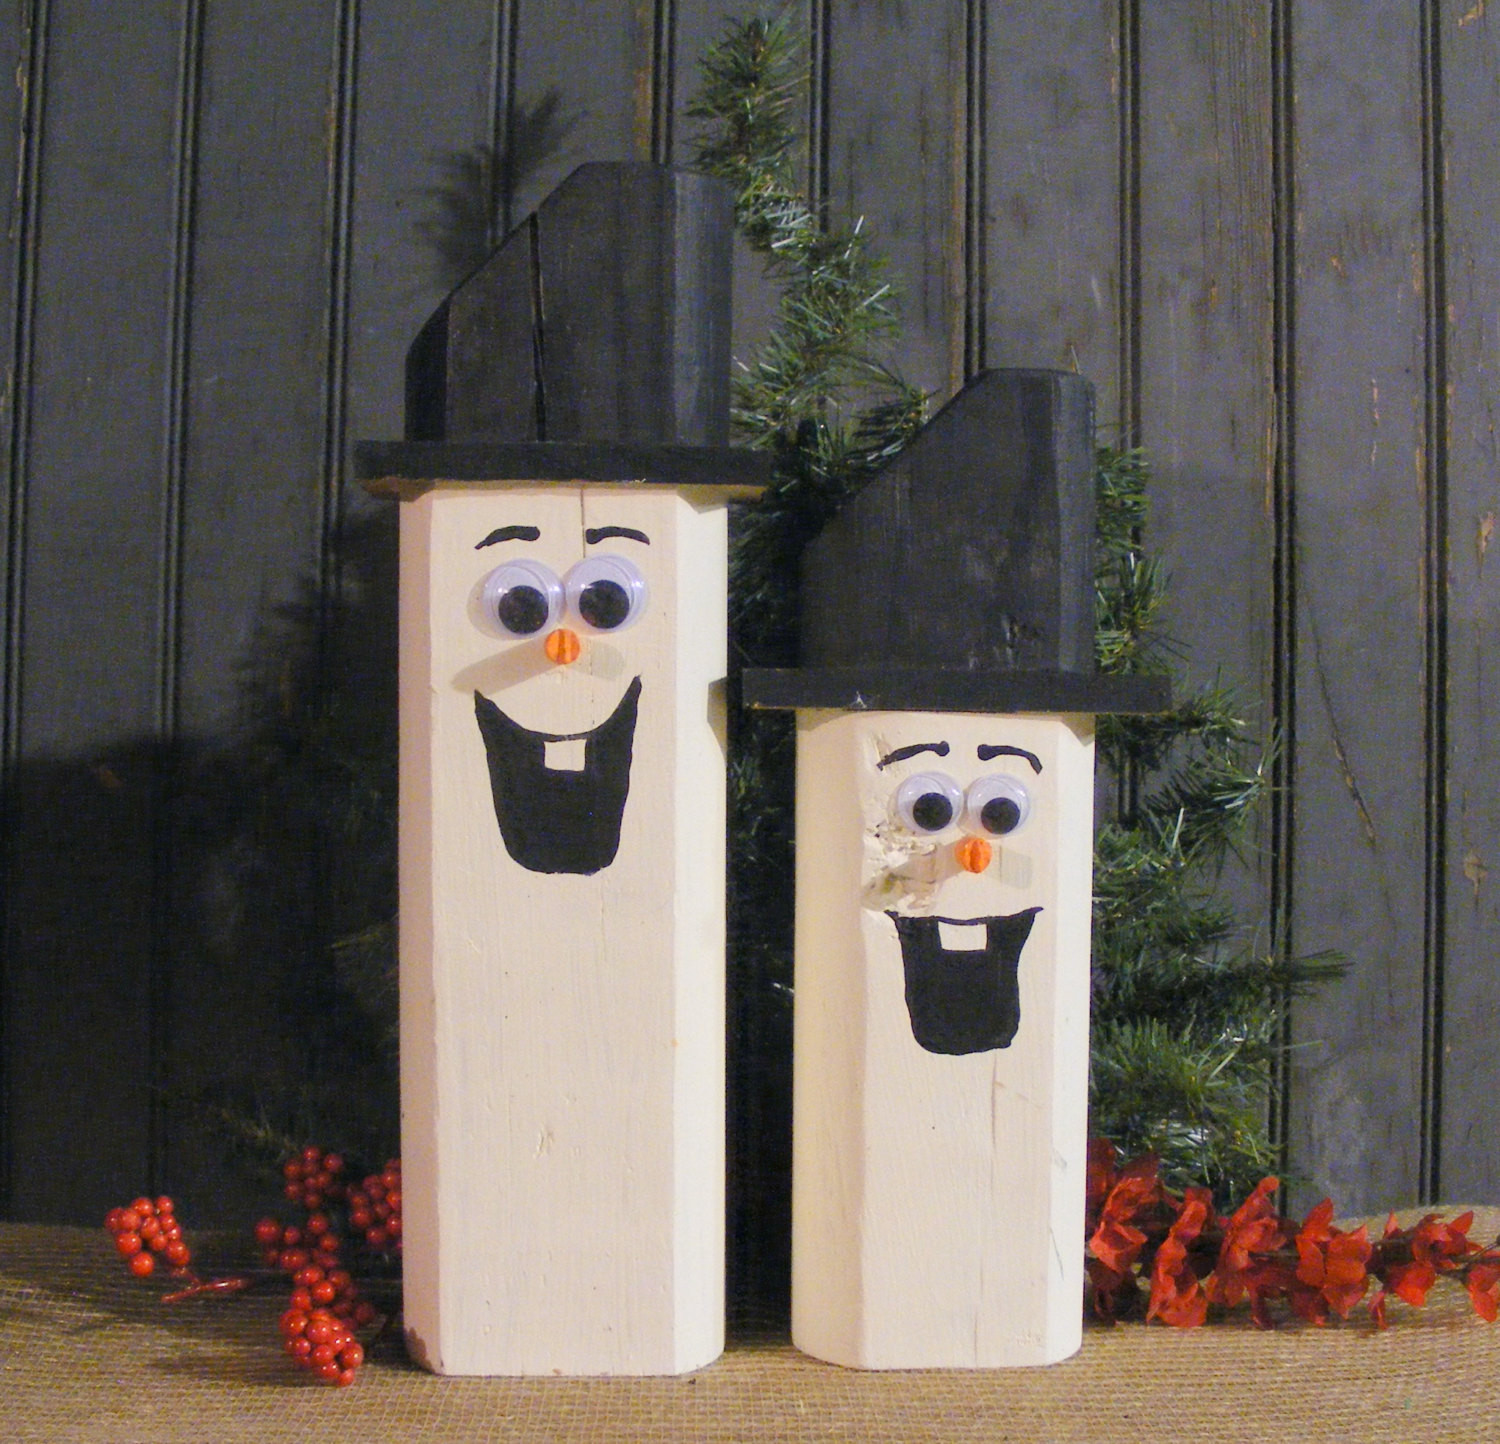 DIY Wooden Snowman
 Wooden Snowman Christmas Mantle Decorations by GFTWoodcraft